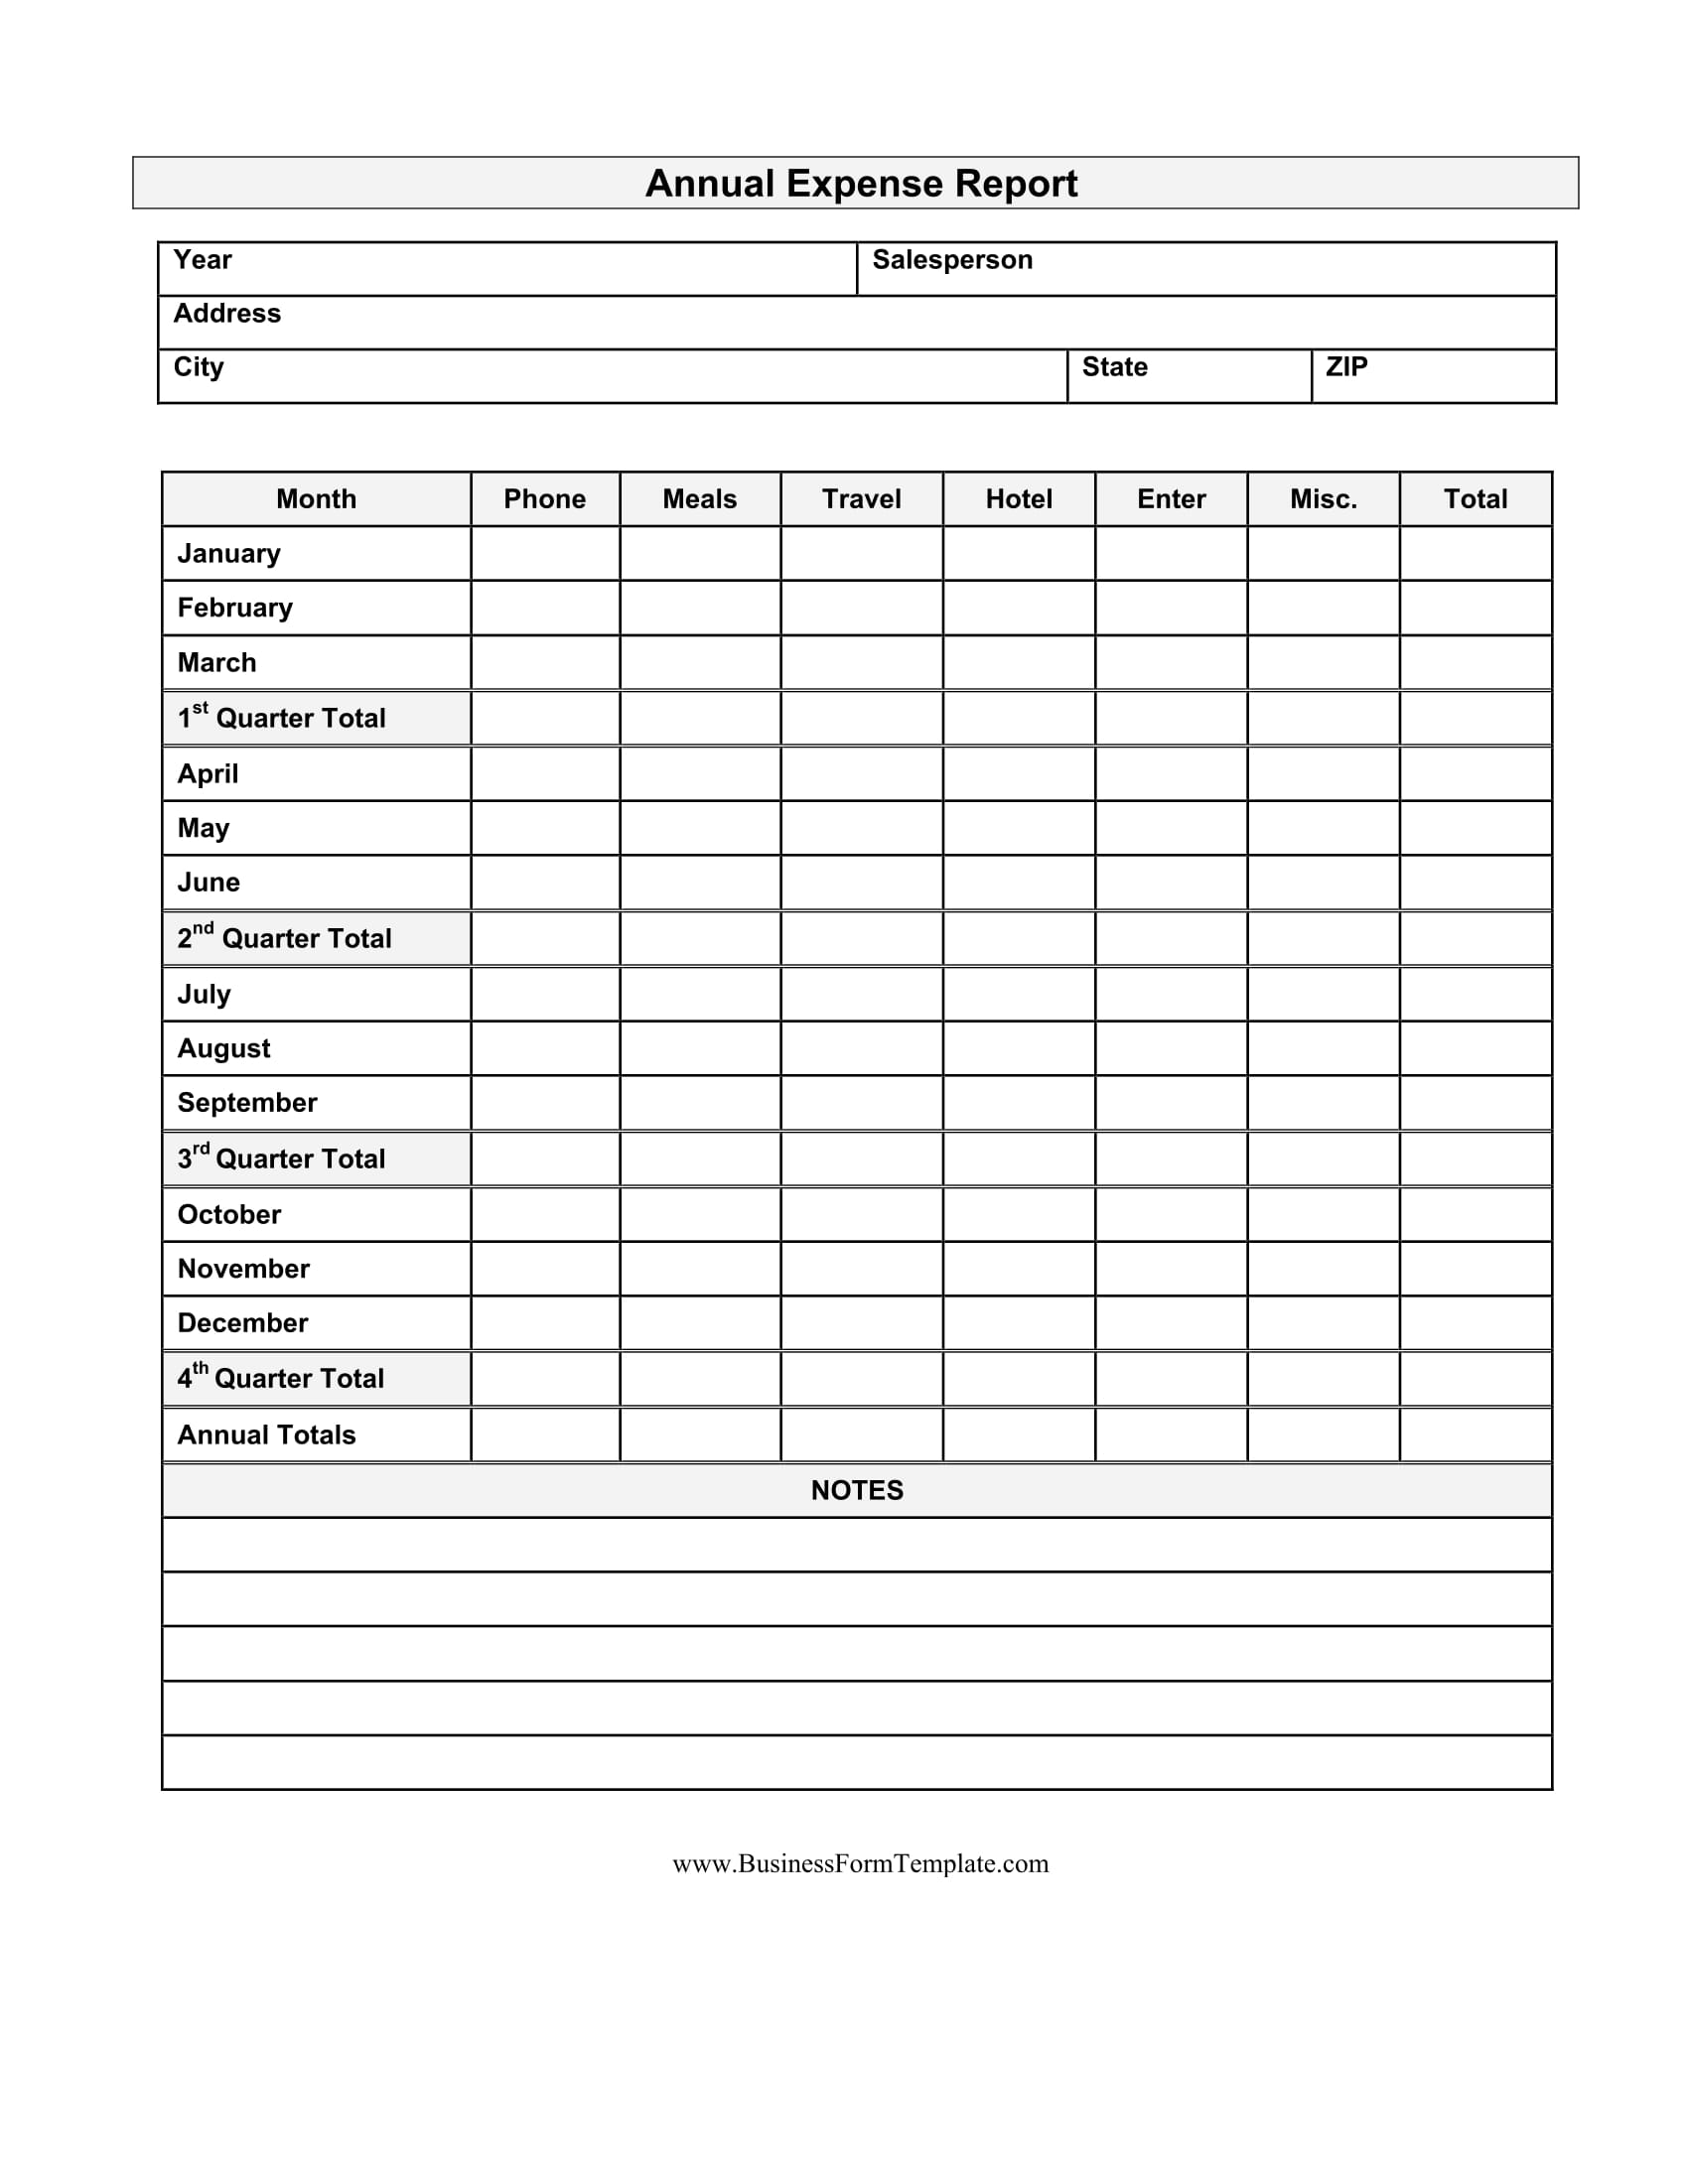 blank annual expense report form 1